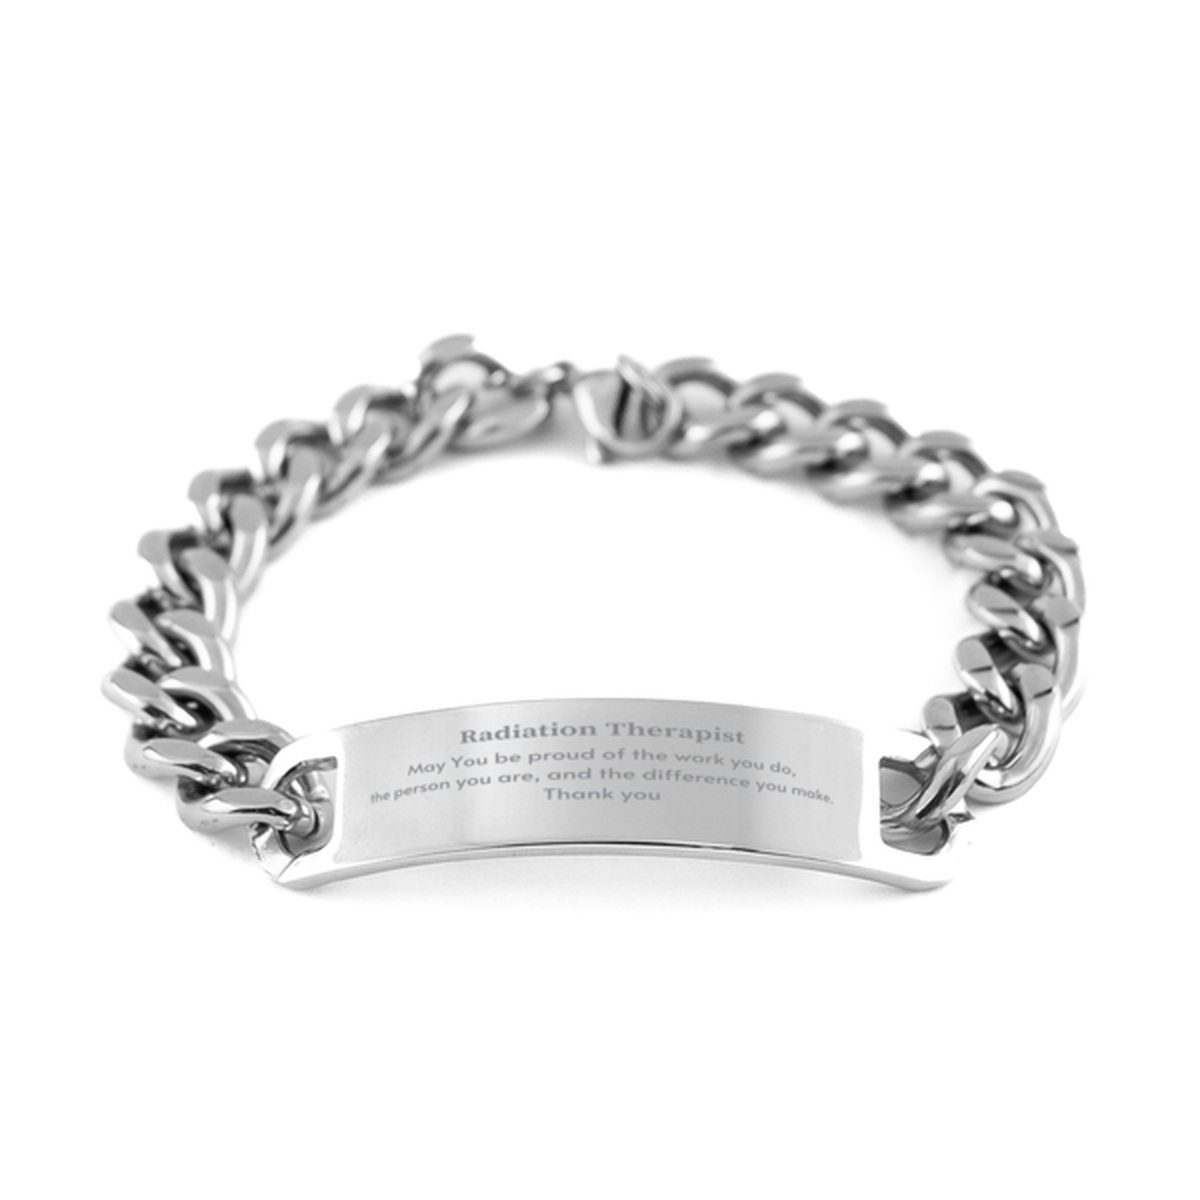 Heartwarming Cuban Chain Stainless Steel Bracelet Retirement Coworkers Gifts for Radiation Therapist, Radiation Therapist May You be proud of the work you do, the person you are Gifts for Boss Men Women Friends